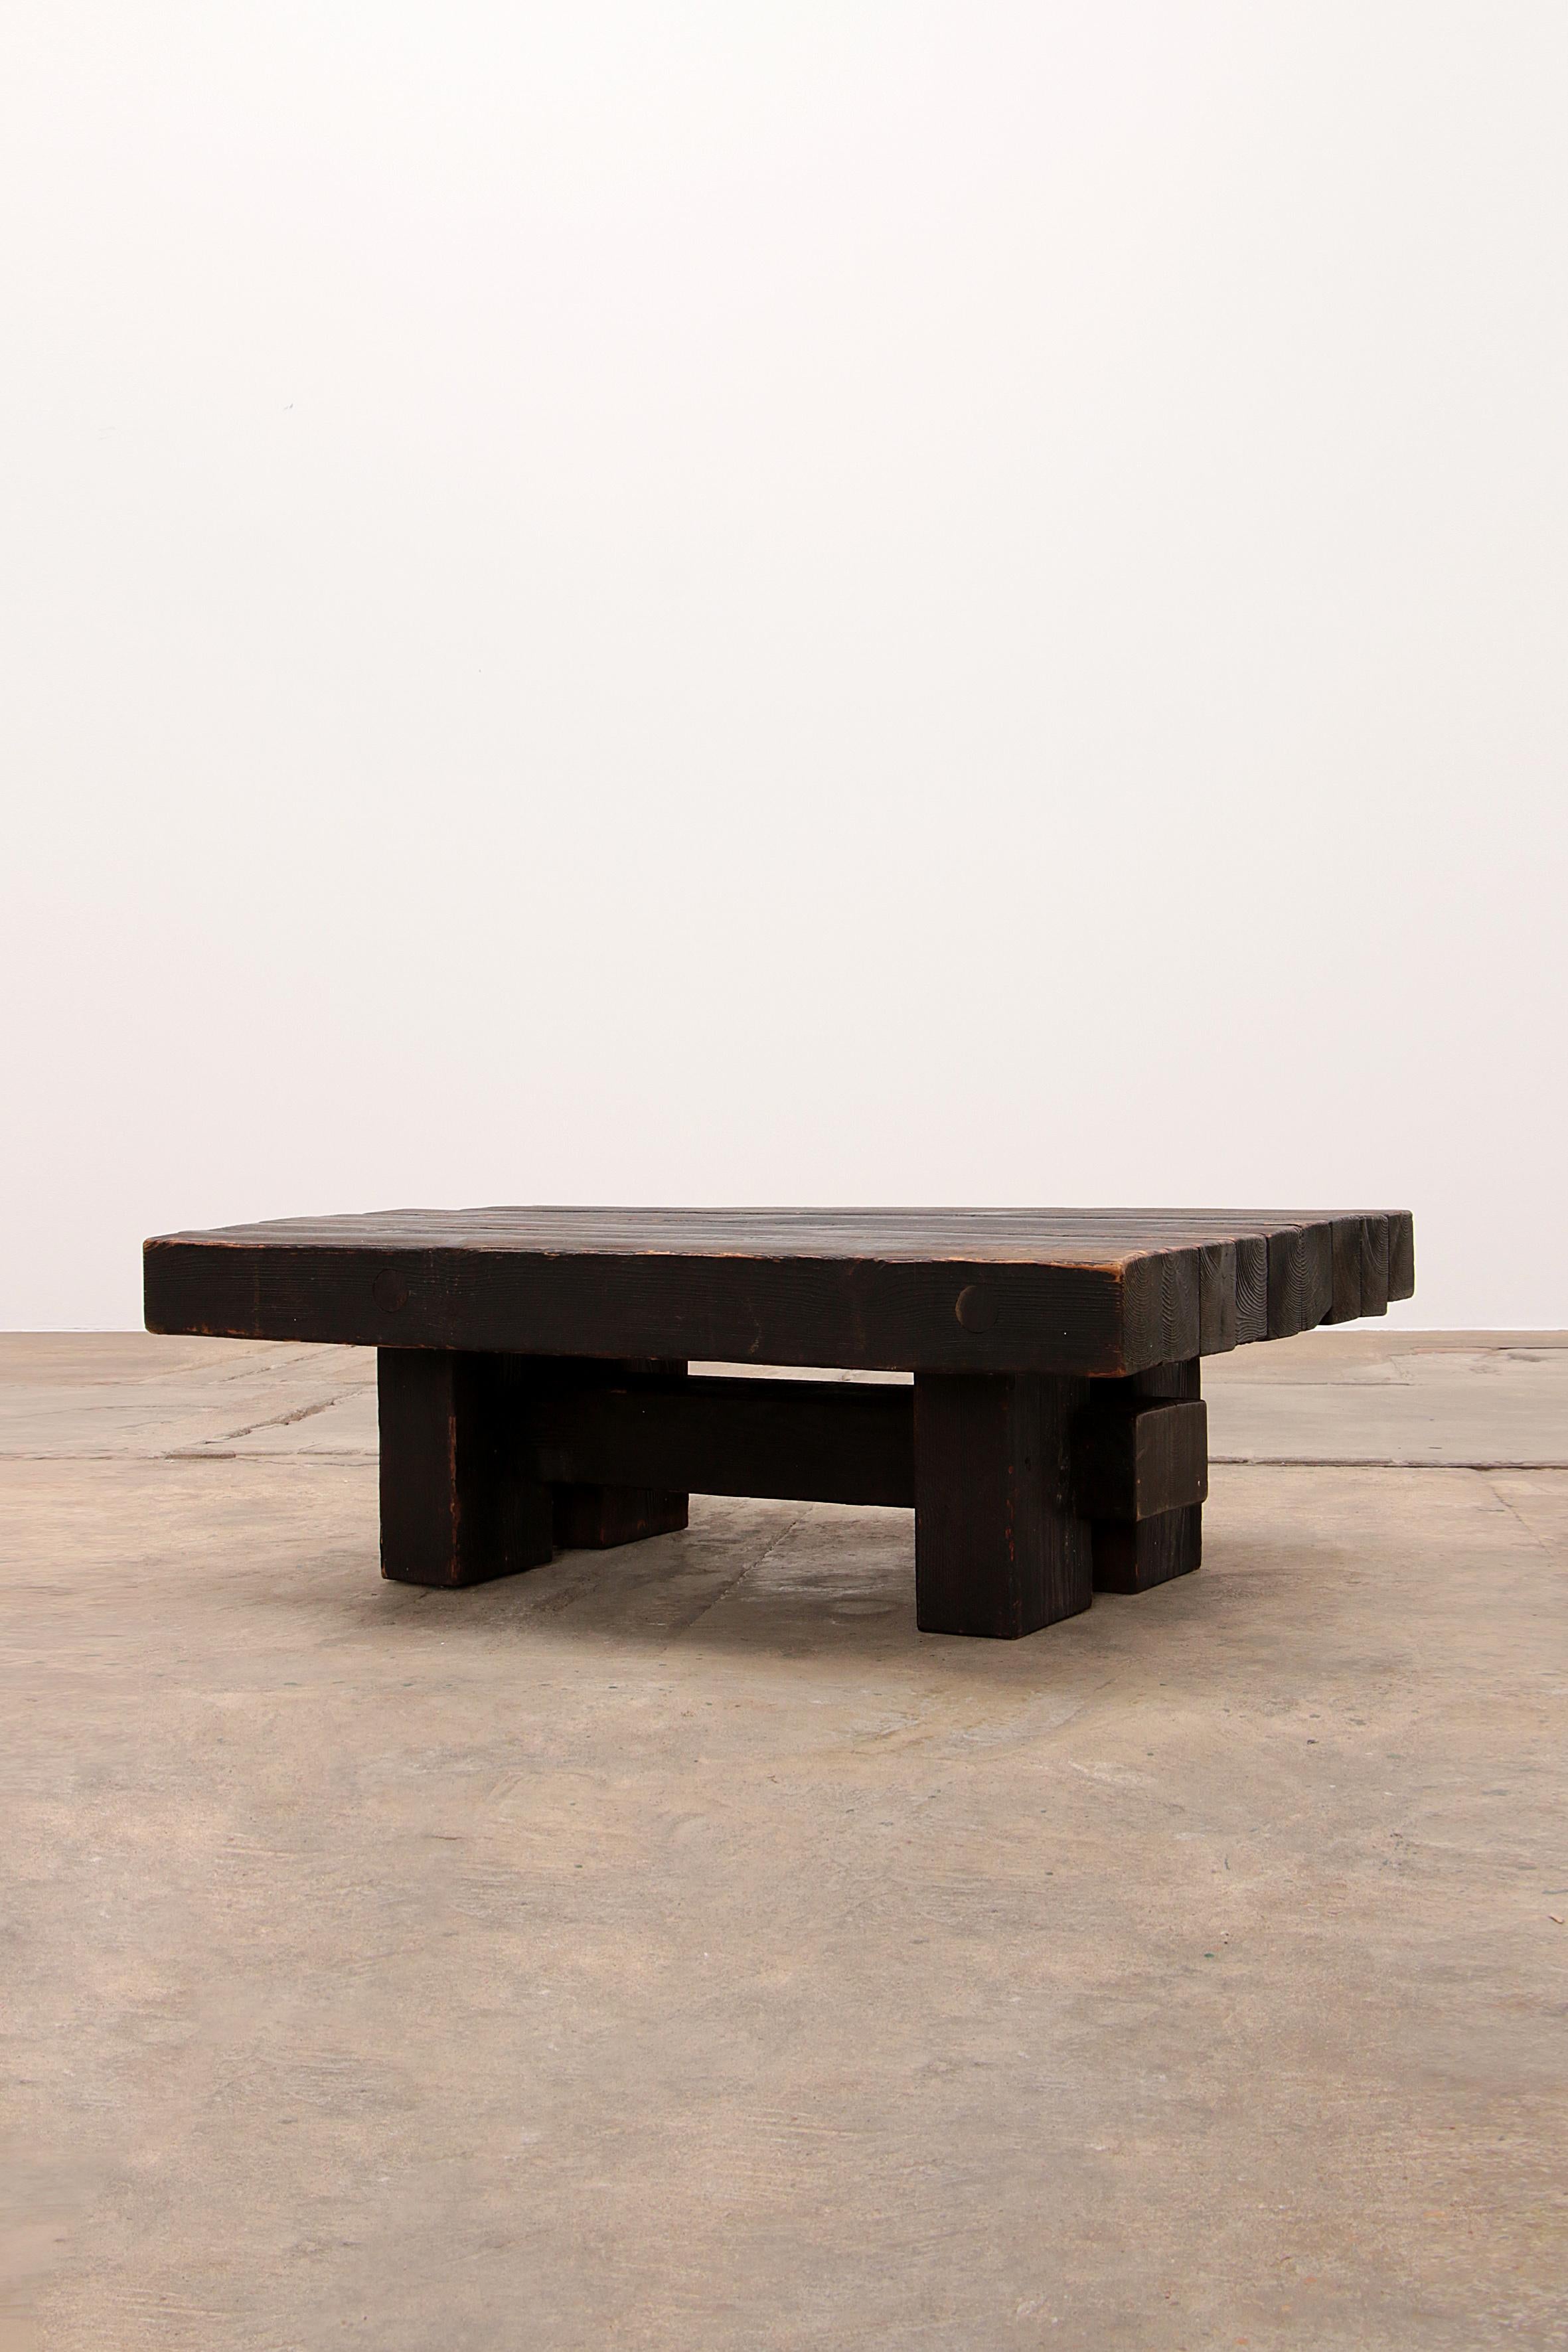 A beautiful coffee table made from old black Pomeranian pine, by Jens Lyngsøe for Havdrup Trævarefabrik.
Made from the wood of old demolished buildings such as a blue-and-yellow warehouse in Copenhagen, dated to around the year 1700.
The designer